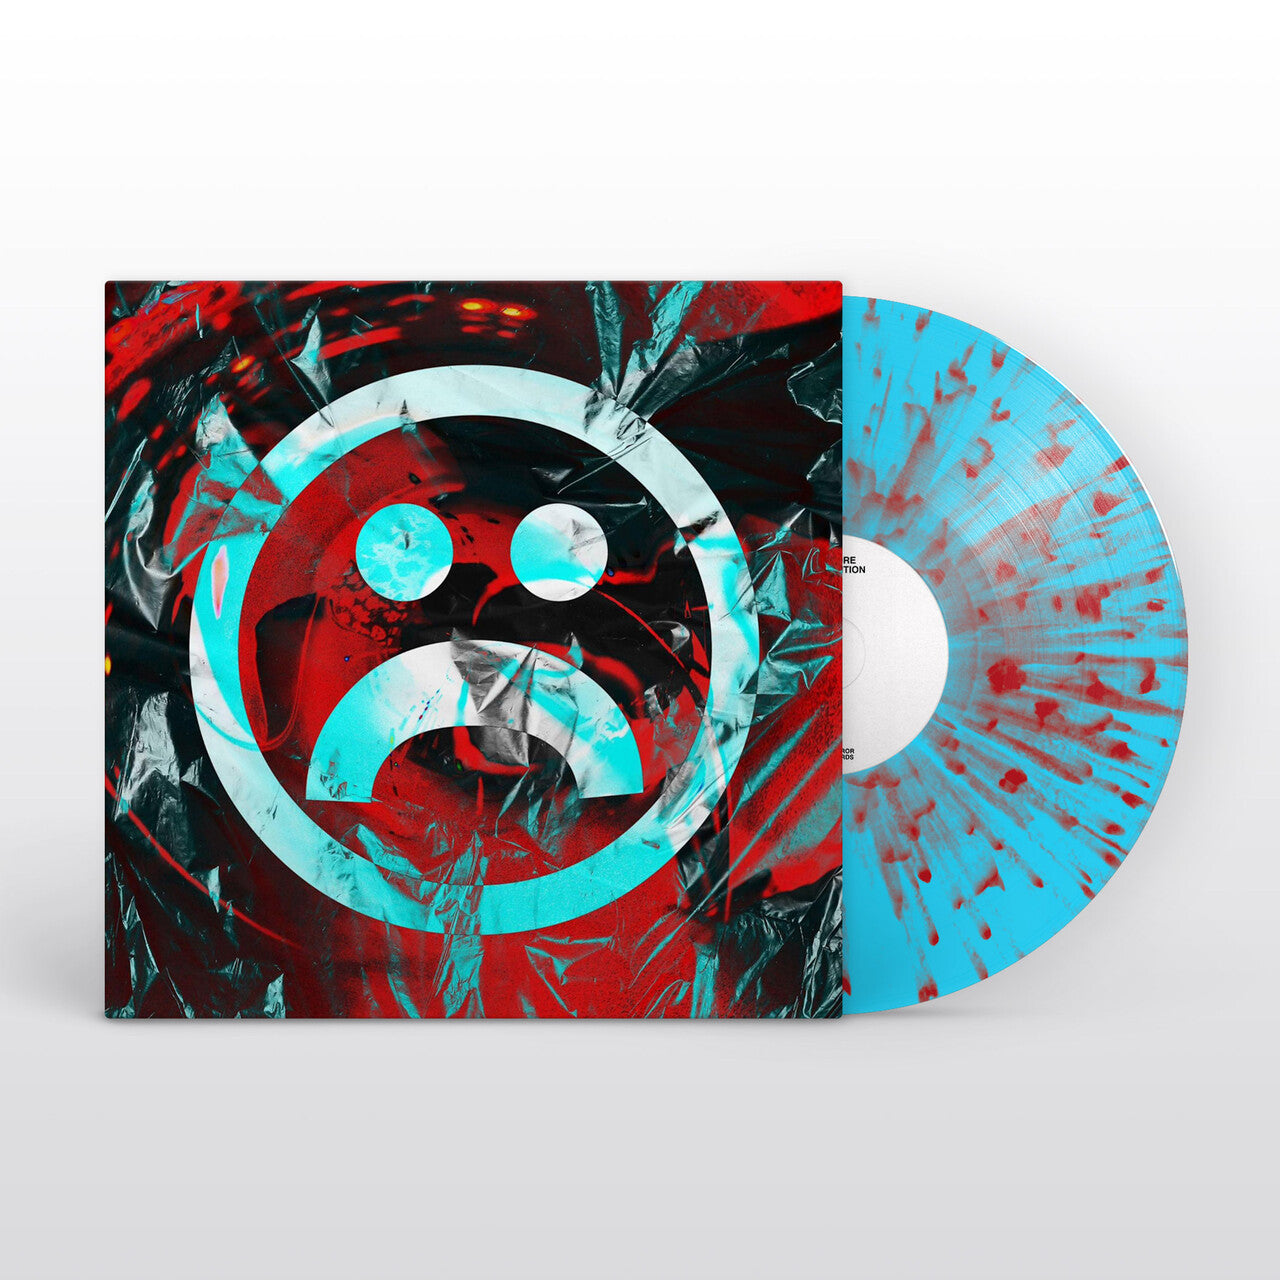 Tokky Horror - Kappacore Xtended Edition: Limited Electric Blue + Red Splatter Vinyl LP